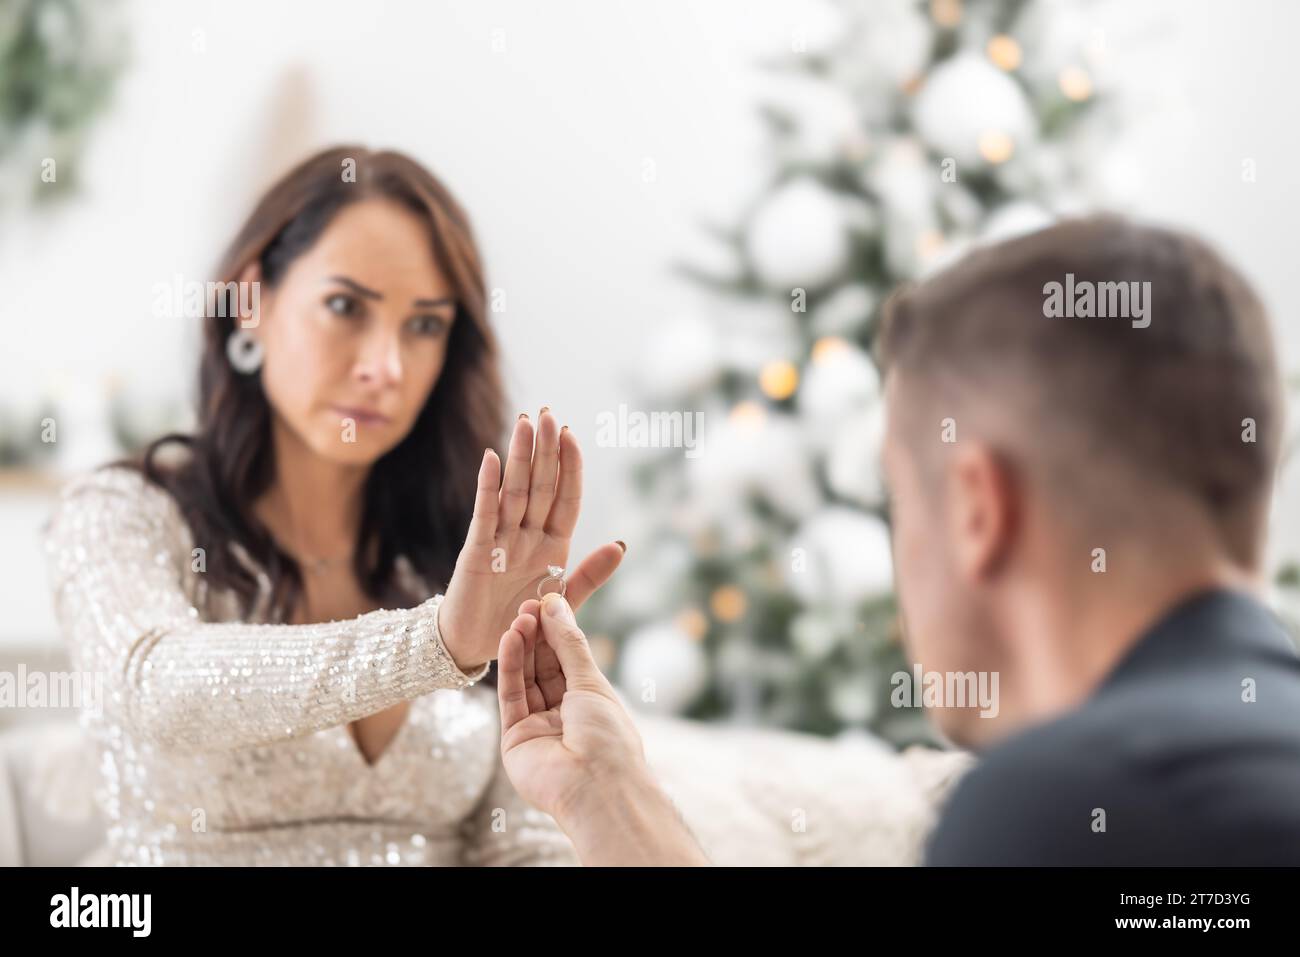 Woman declines a proposal to a man kneeing in front of her with a ring in his hand during Christmas. Stock Photo